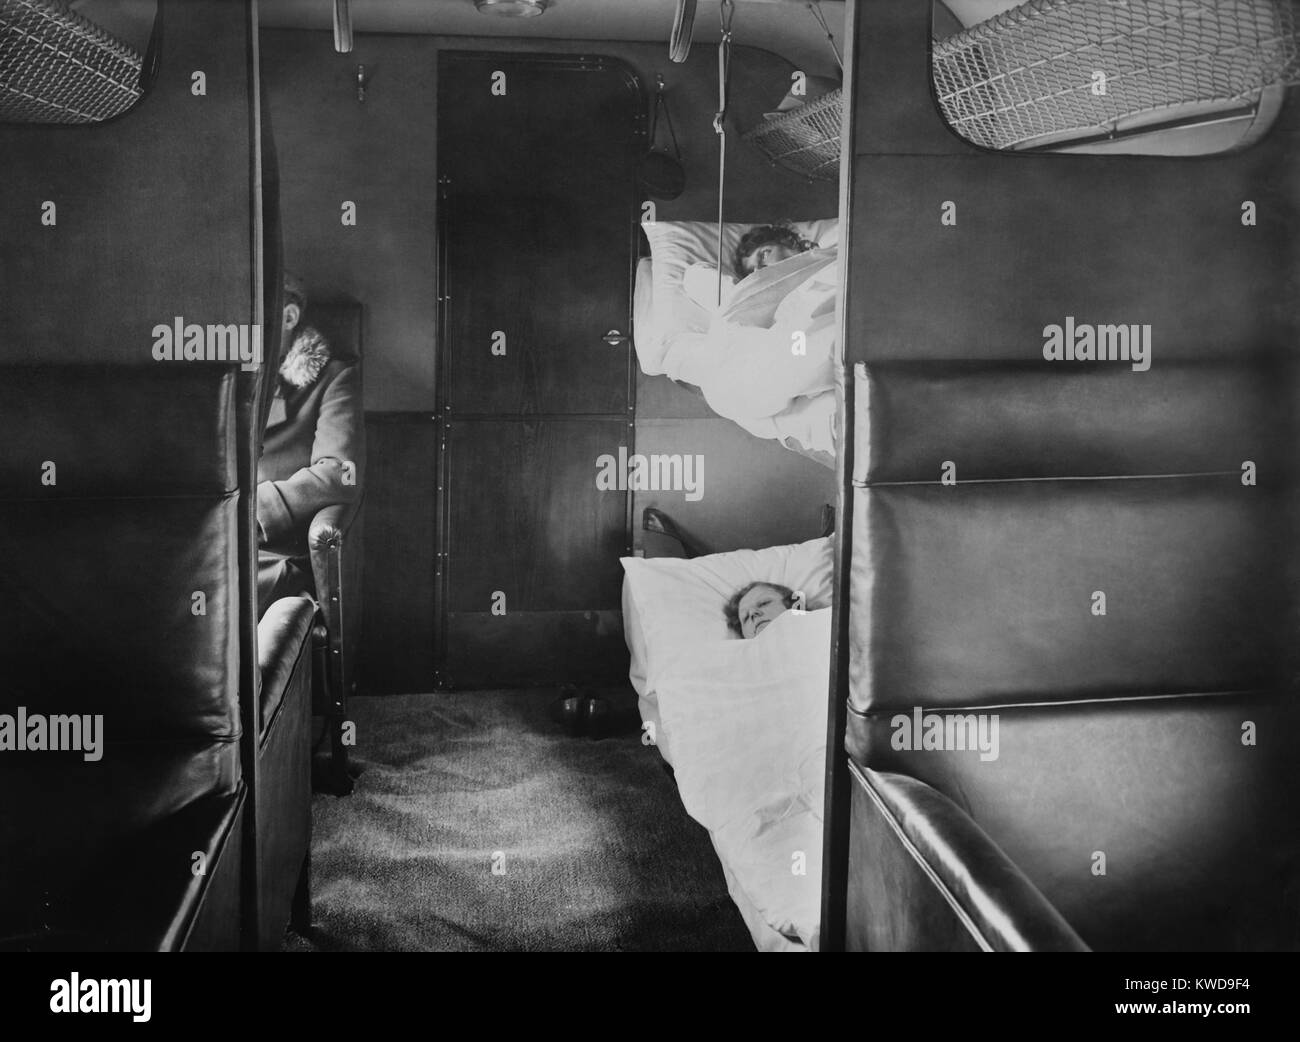 Interior of Junkers' plane with passenger sitting in leather armchair seats. In the foreground are sleeping bunks (BSLOC 2016 10 166) Stock Photo